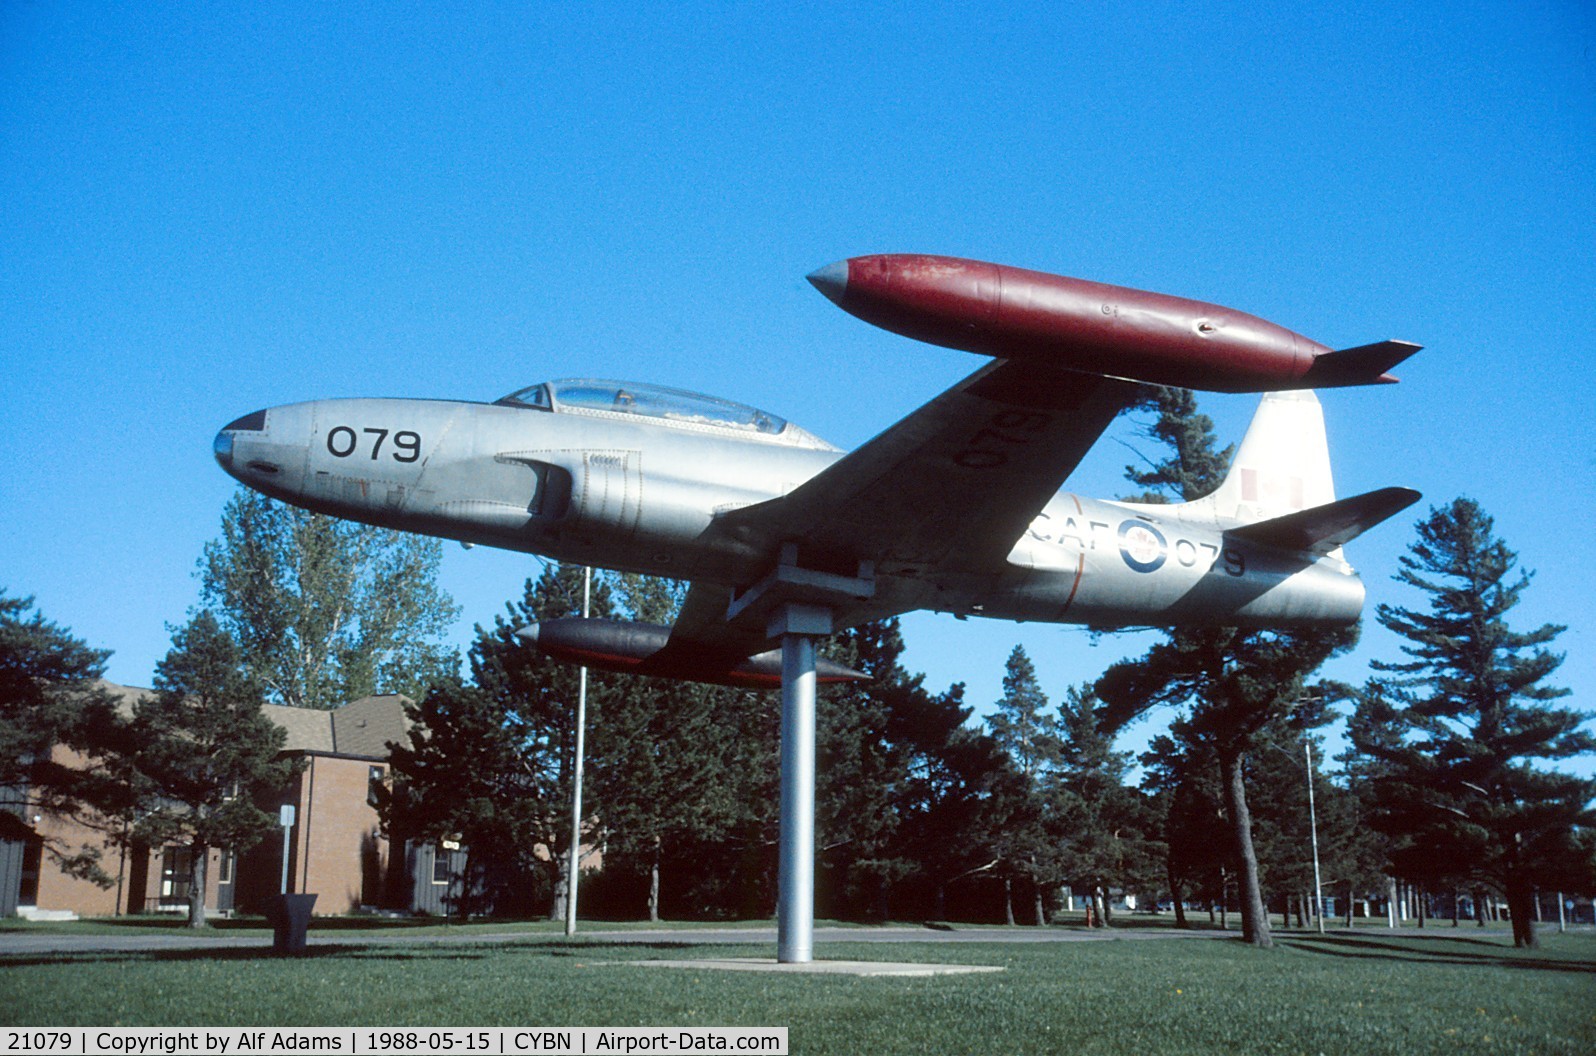 21079, Canadair CT-133 Silver Star 3 C/N T33-079, CT-133 21079 shown displayed on a pedestal at Canadian Forces Base Borden, Ontario in May 1988.